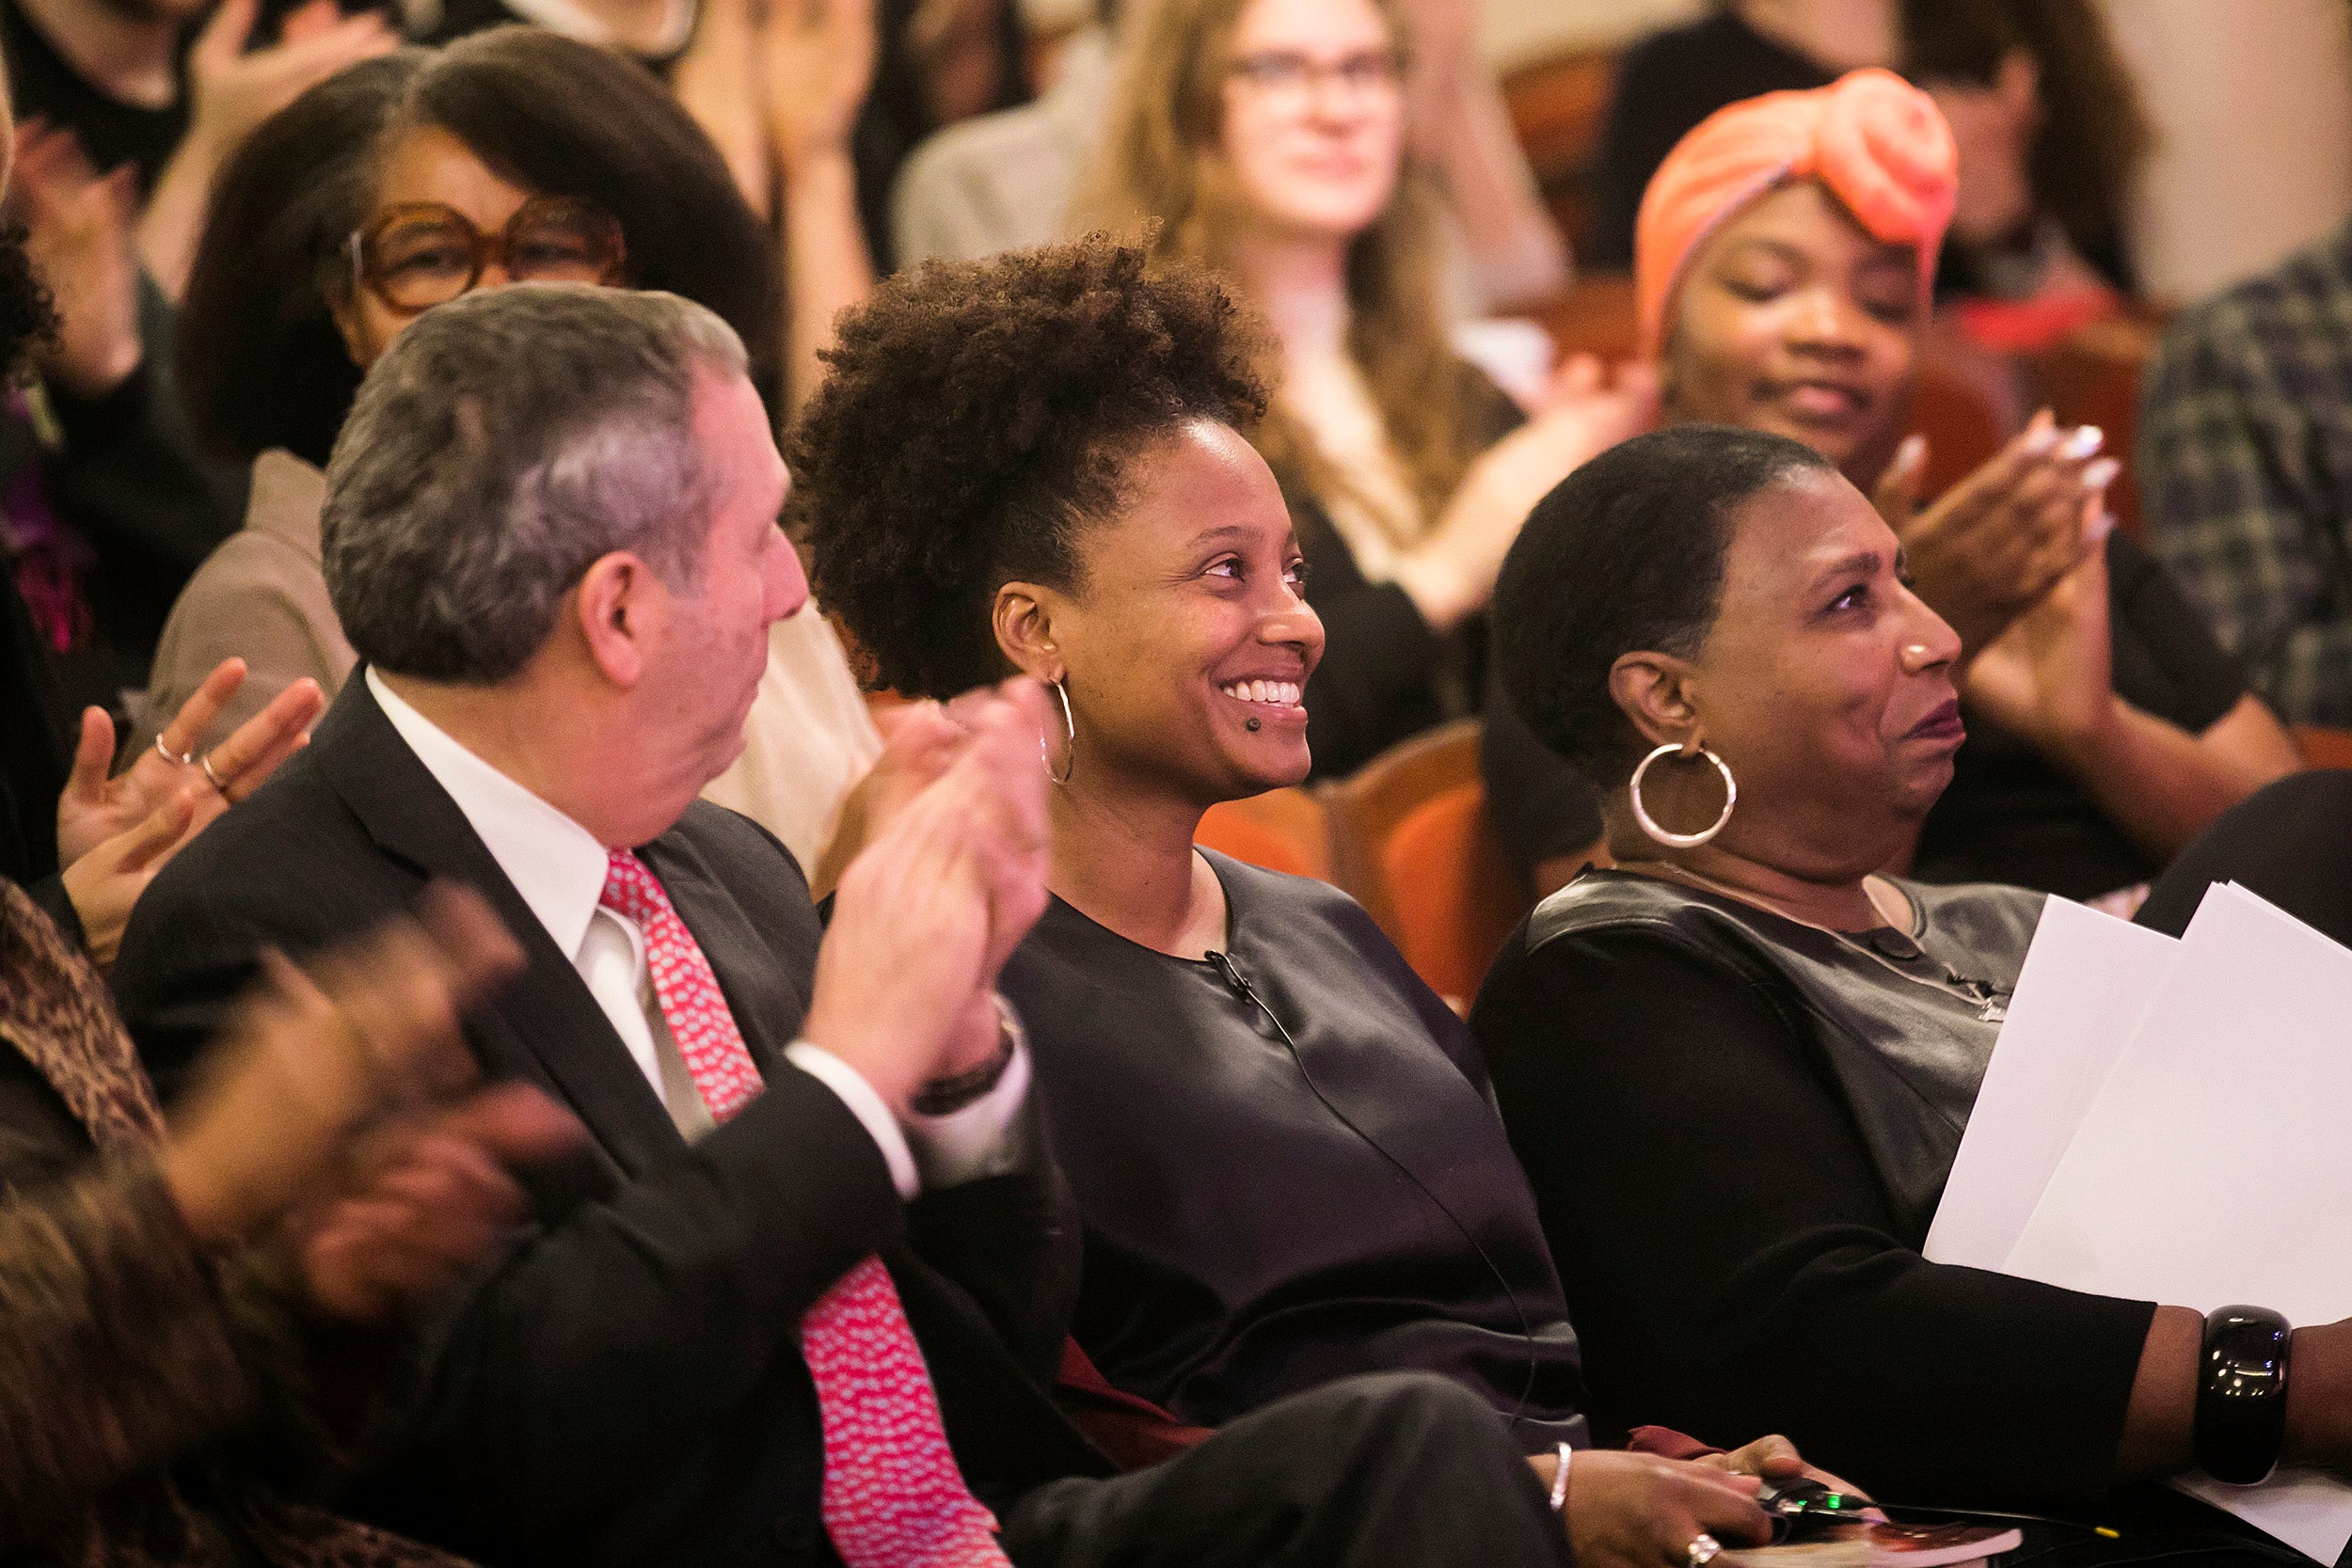 U.S. poet laureate Tracy K. Smith ’94, center, is applauded by Harvard President Larry Bacow, left, and journalist Callie Crossley, right